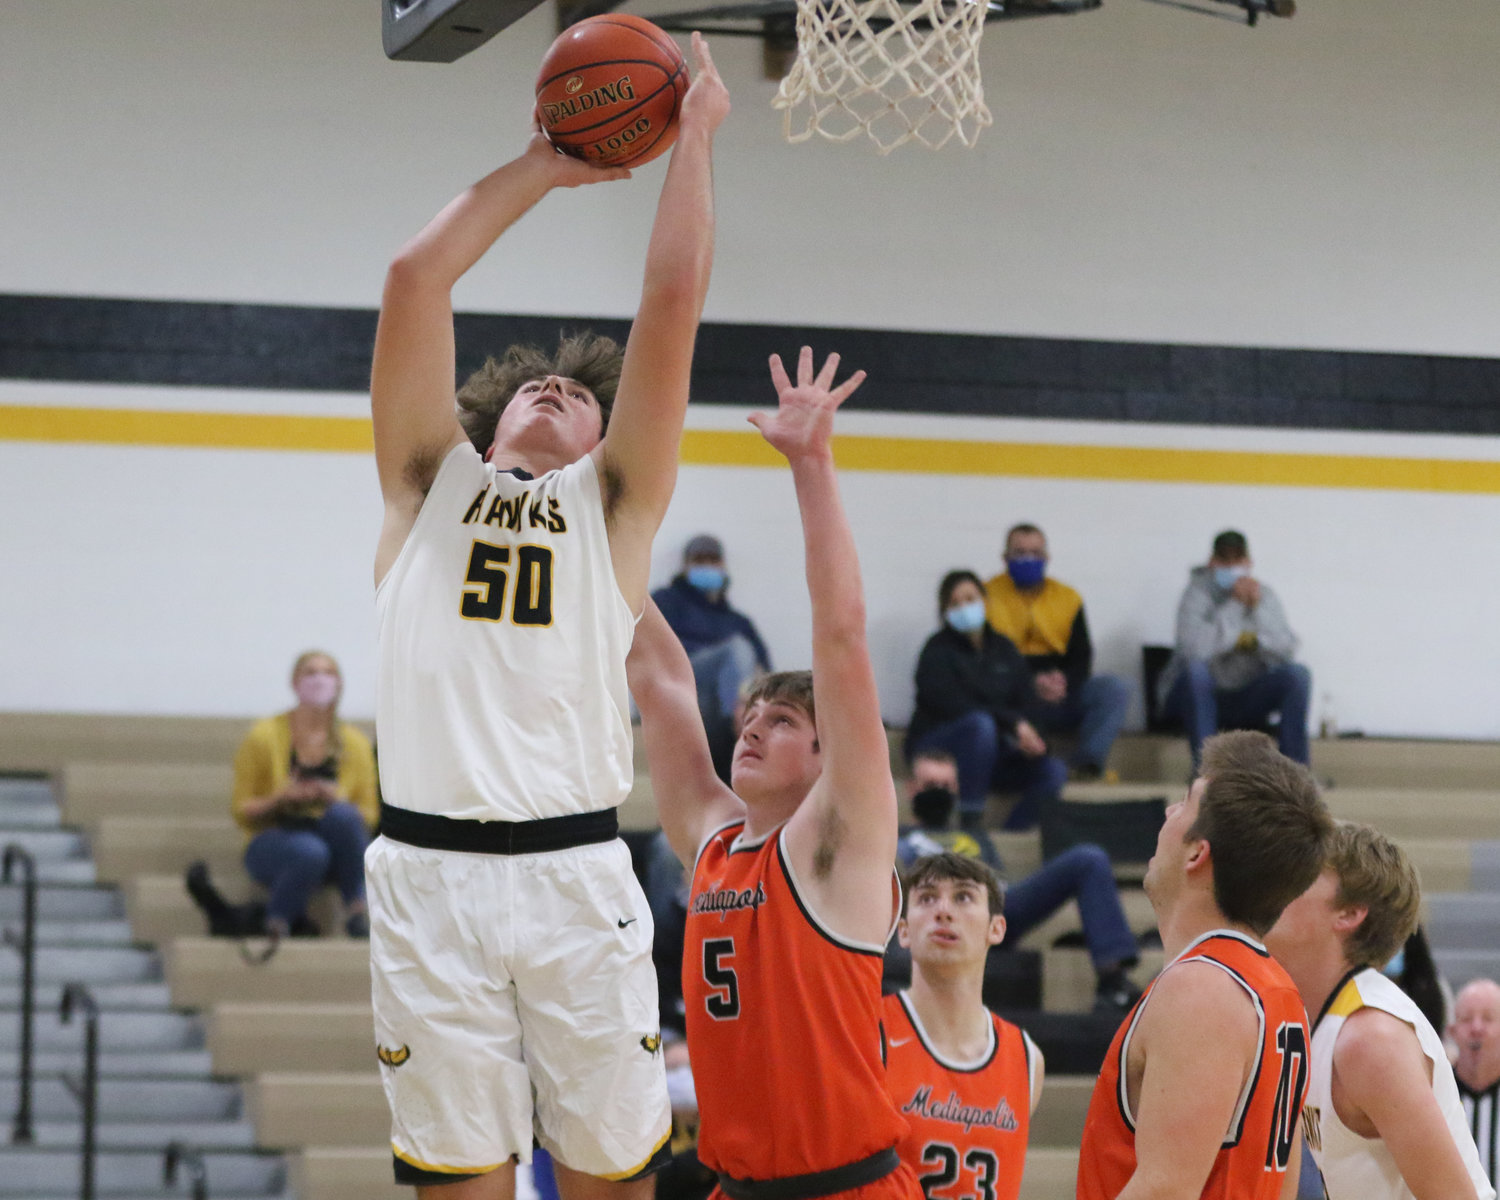 Aidan Rath puts up a shot in the paint during the first quarter of a scrimmage with Mediapolis in Wellman on Saturday, November 21.